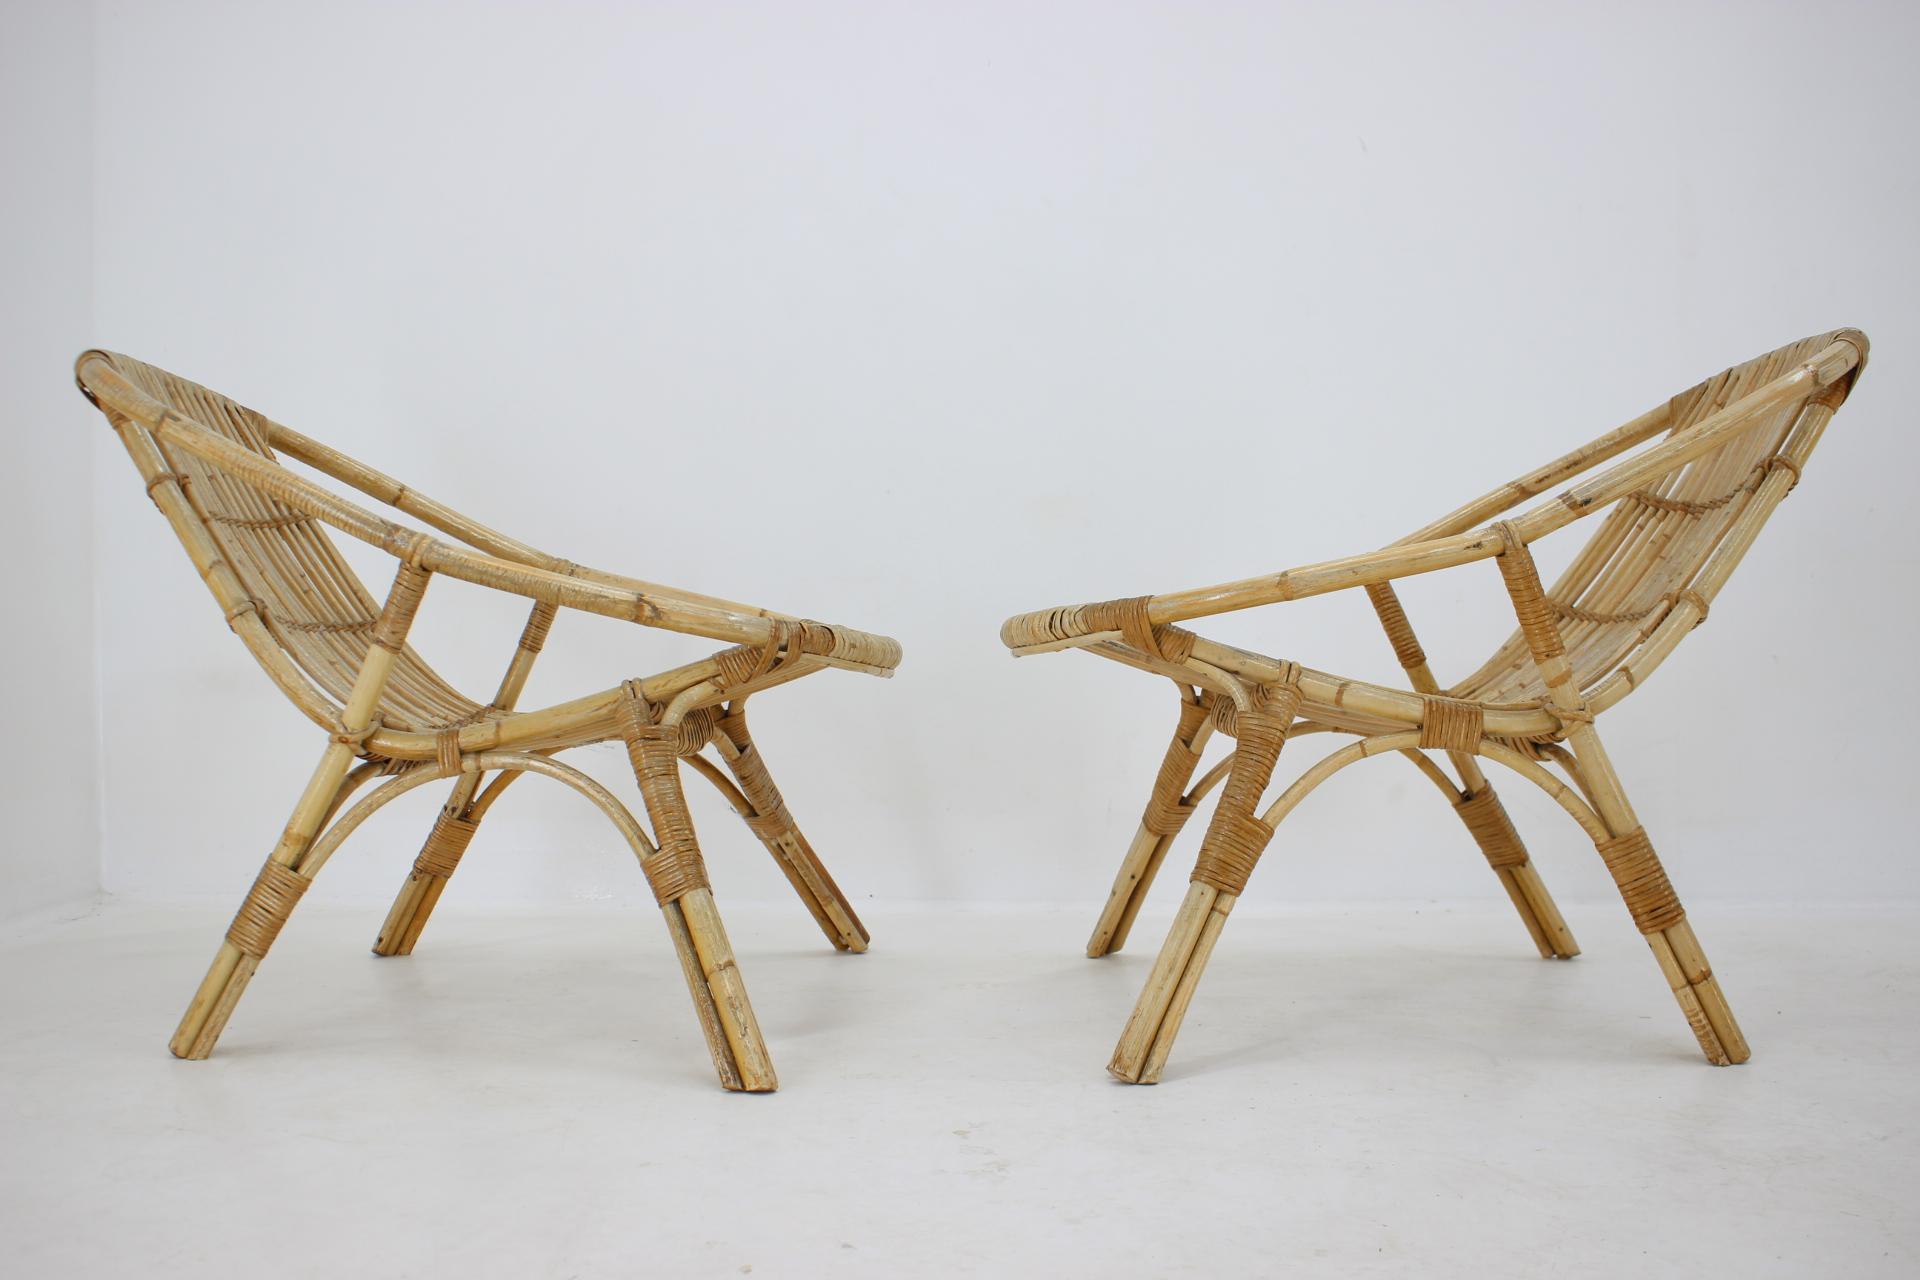 Czech Set of Garden or Interior Rattan Table and Three Armchairs by Alan Fuchs, 1970s For Sale